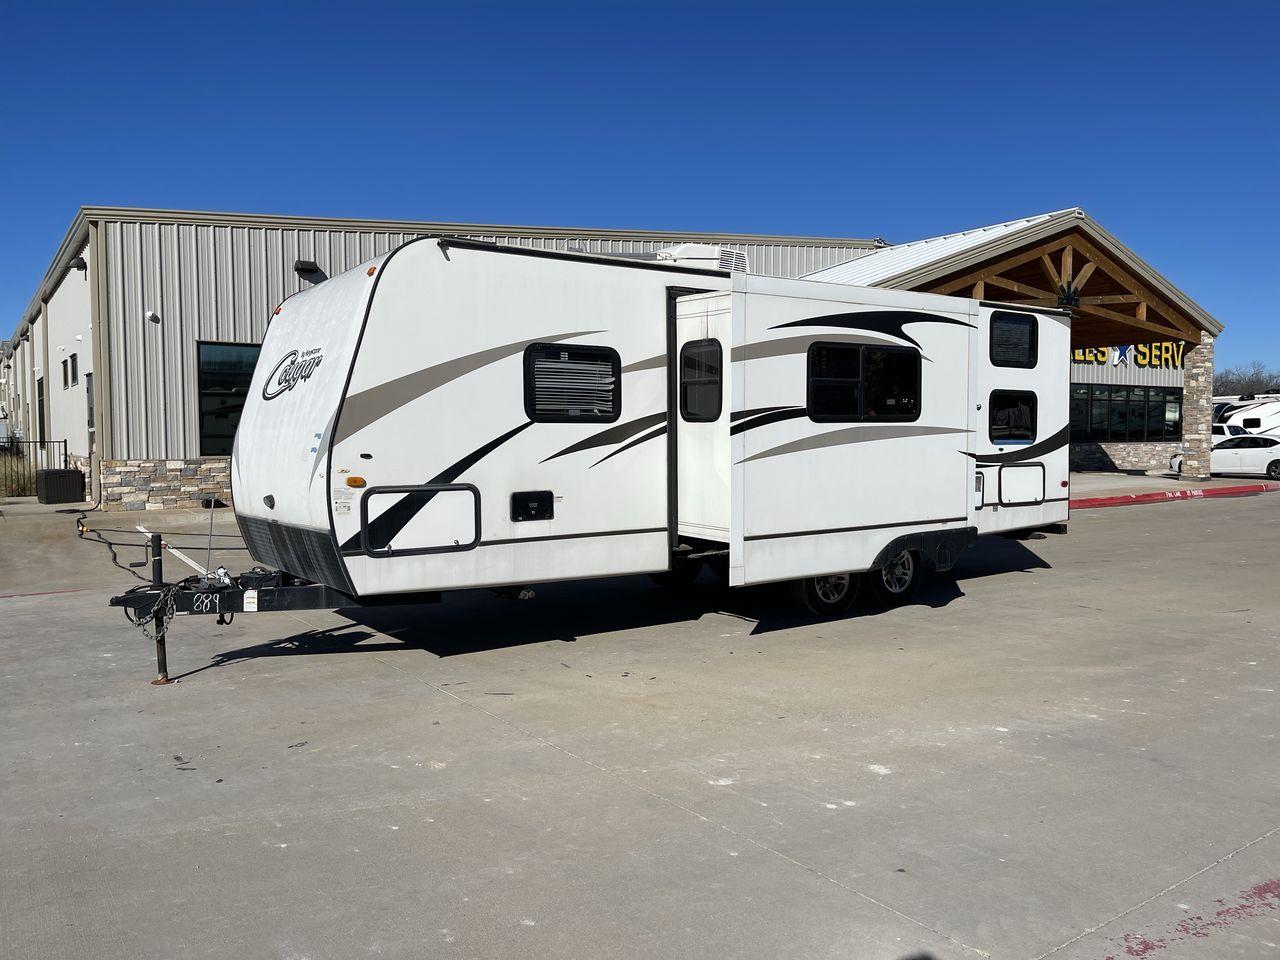 2014 WHITE KEYSTONE COUGAR MDL 260RB (4YDT26027EV) , Length: 29.67 ft. | Dry Weight: 5,065 lbs. | Slides: 1 transmission, located at 4319 N Main Street, Cleburne, TX, 76033, (817) 221-0660, 32.435829, -97.384178 - The 2014 Keystone Cougar Model 260RB travel trailer offers the ideal fusion of elegance and utility. With its roomy and welcoming interior, this well-designed RV is a great option for both long trips and weekend excursions. This travel trailer has a length of 29.8 ft and weighs 5,065 lbs. It is s - Photo #22